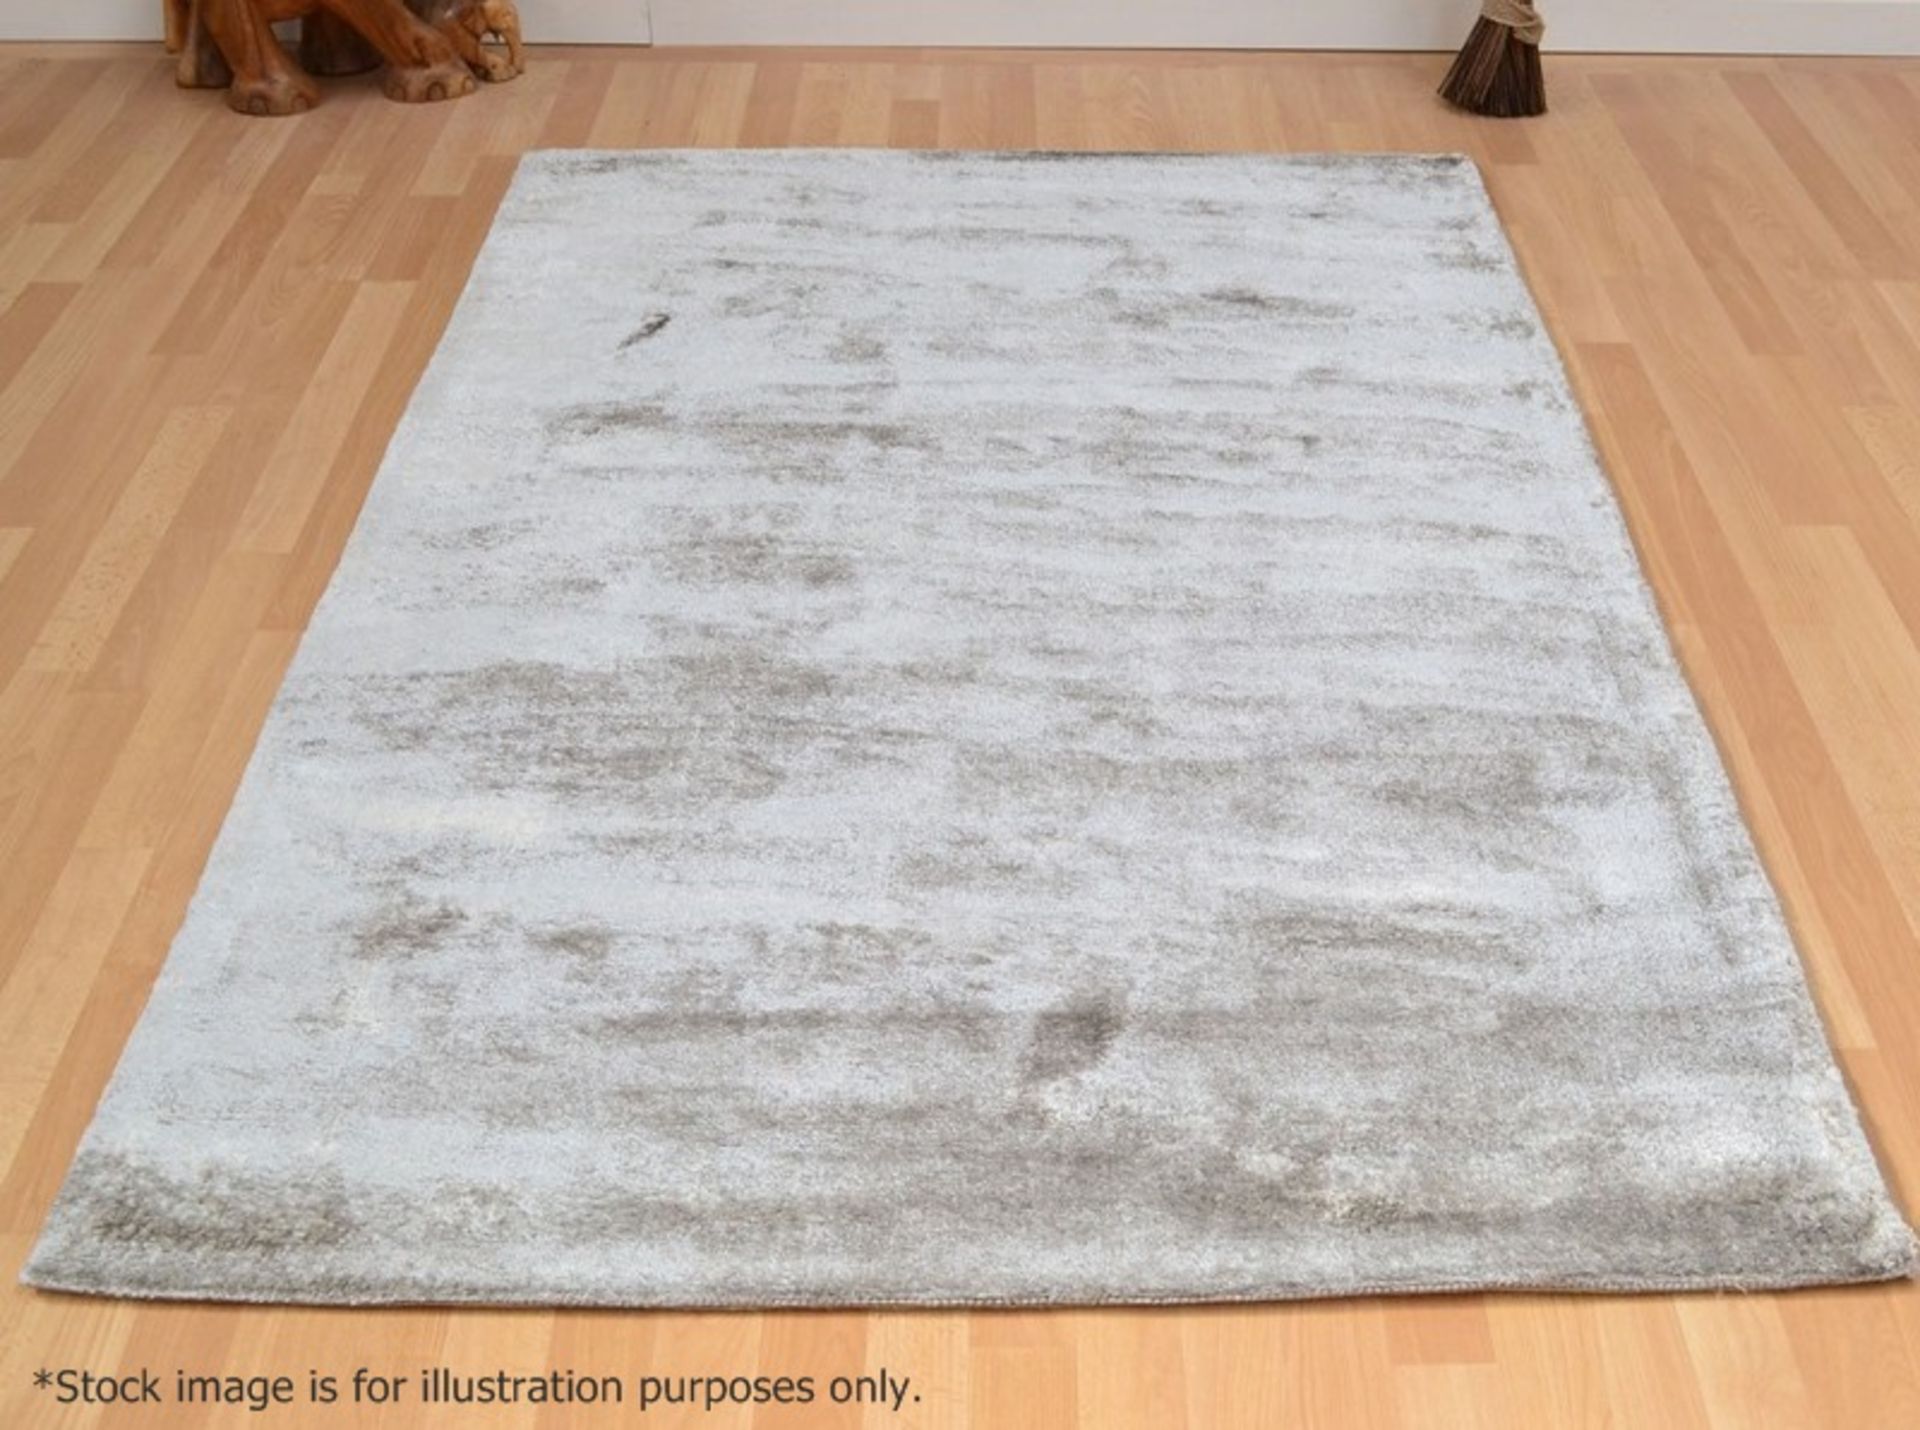 1 x Asiatic 'Dolce' Luxurious Rug in Silver - Dimensions (approx): 160x230cm - Ref: 6319128/